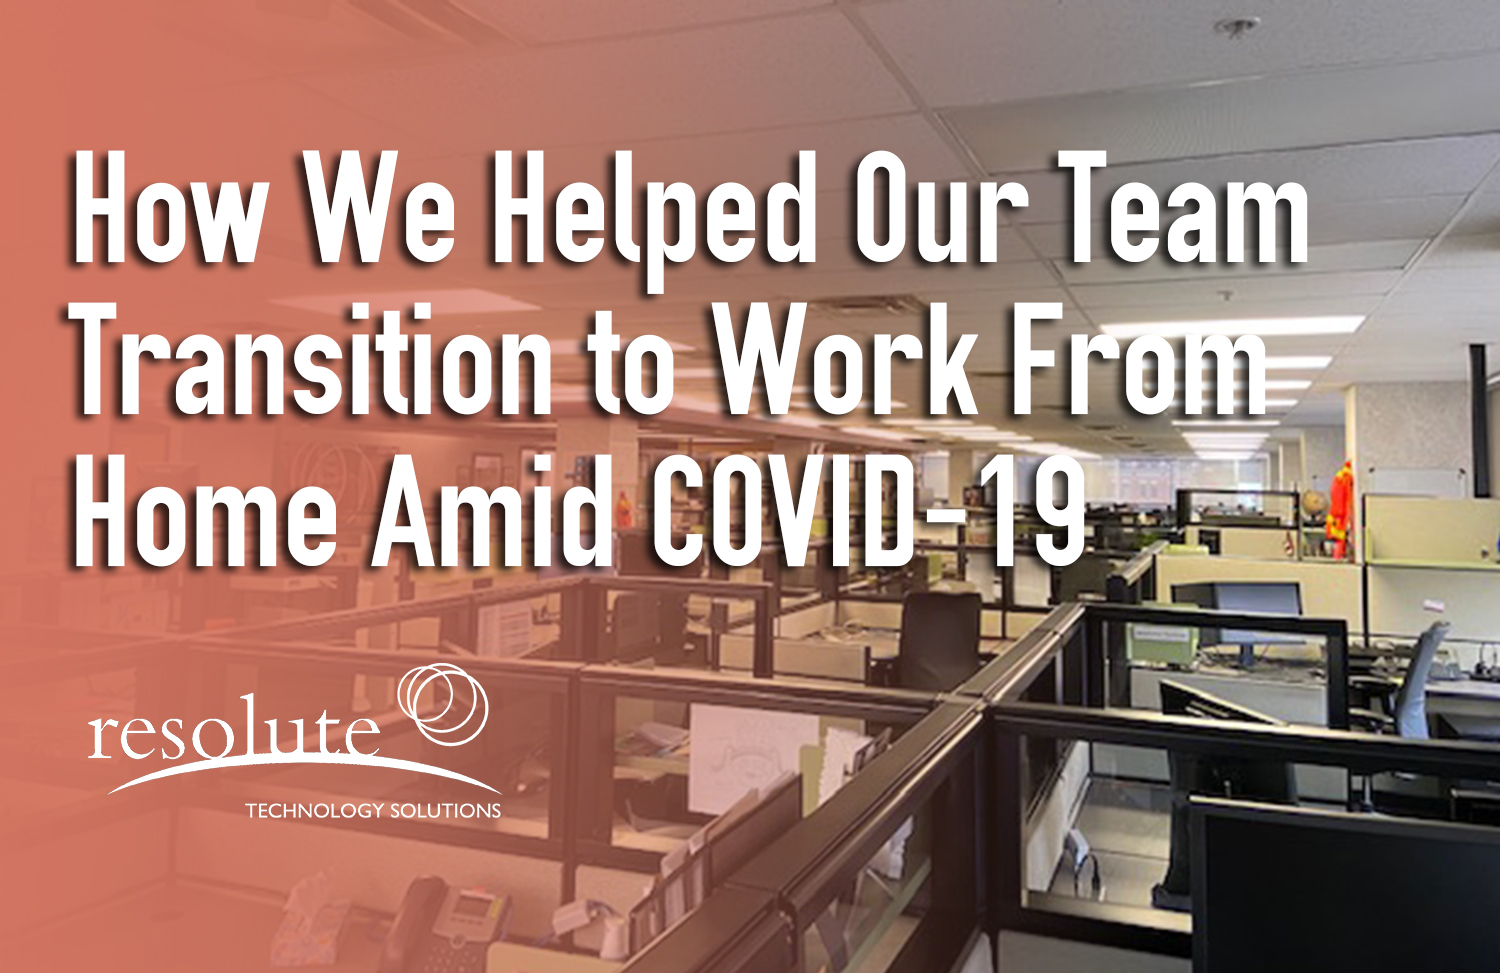 How We Helped Our Team Transition to Work From Home Amid COVID-19